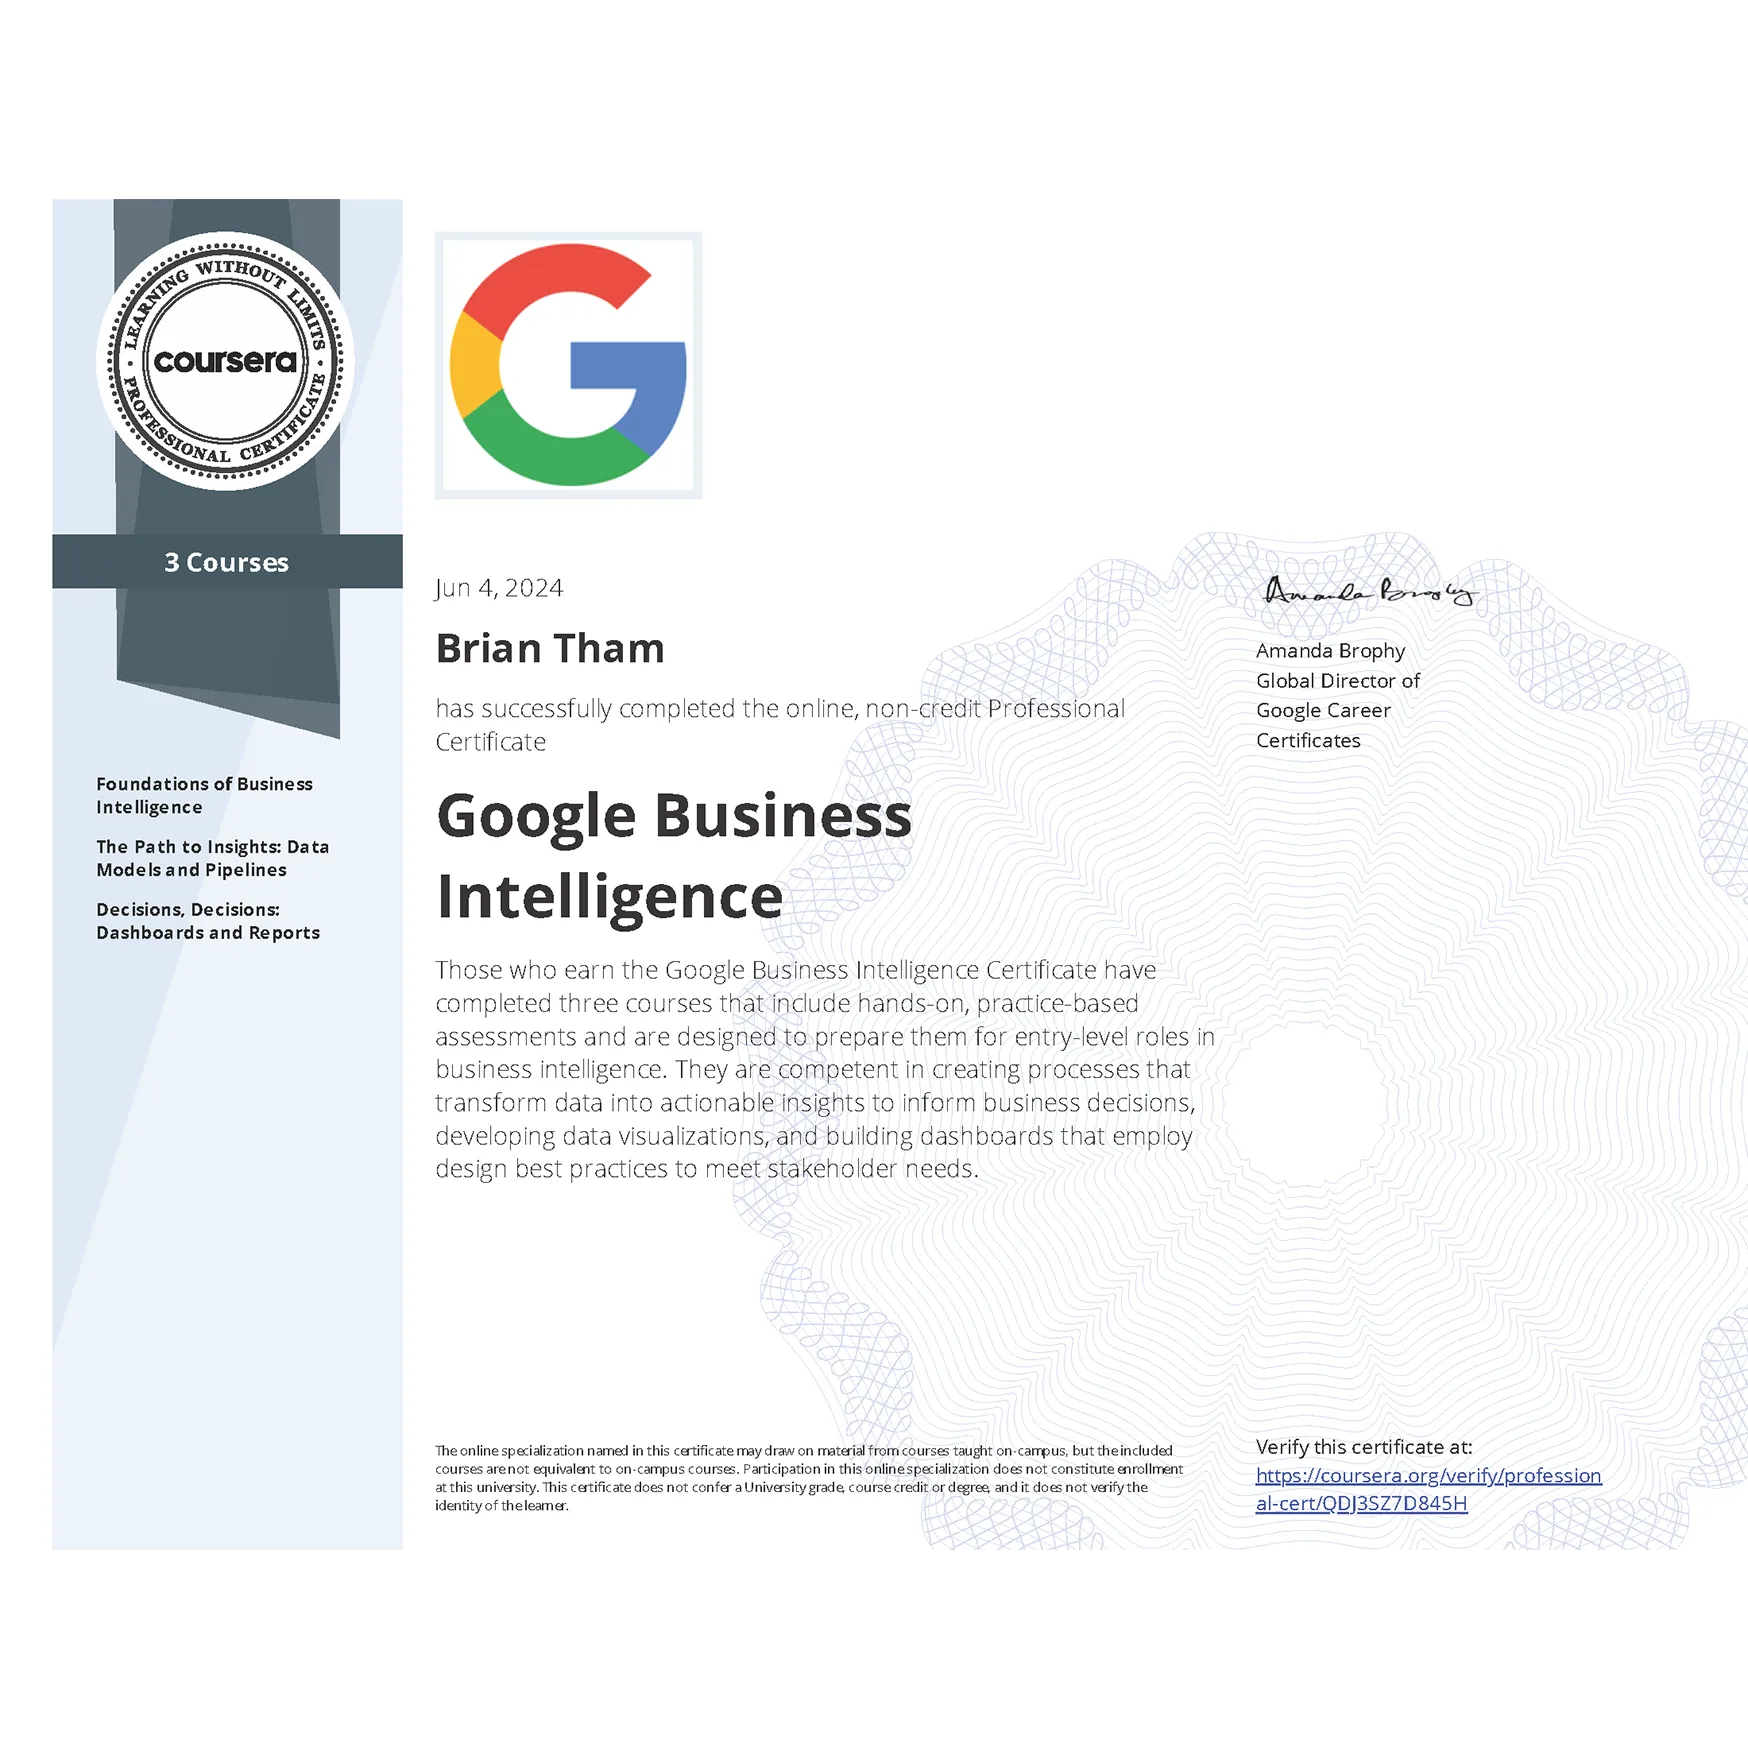 Google Business Intelligence certificate awarded to Brian Tham